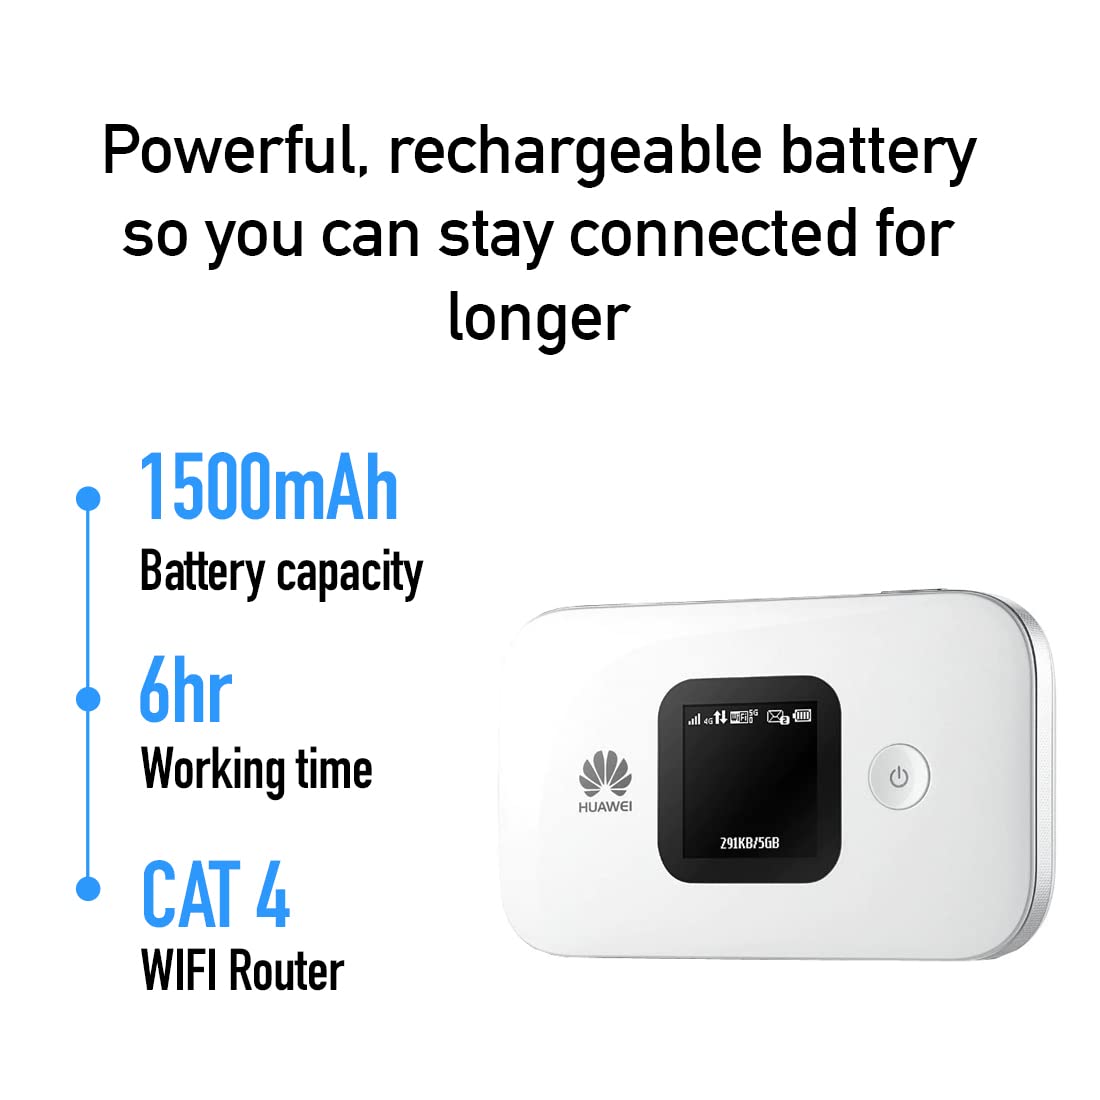 Huawei E5577 White 4G Low-cost Travel Wi-Fi, Super-Fast Portable Mobile Wi-Fi Hotspot – Long-lasting Battery